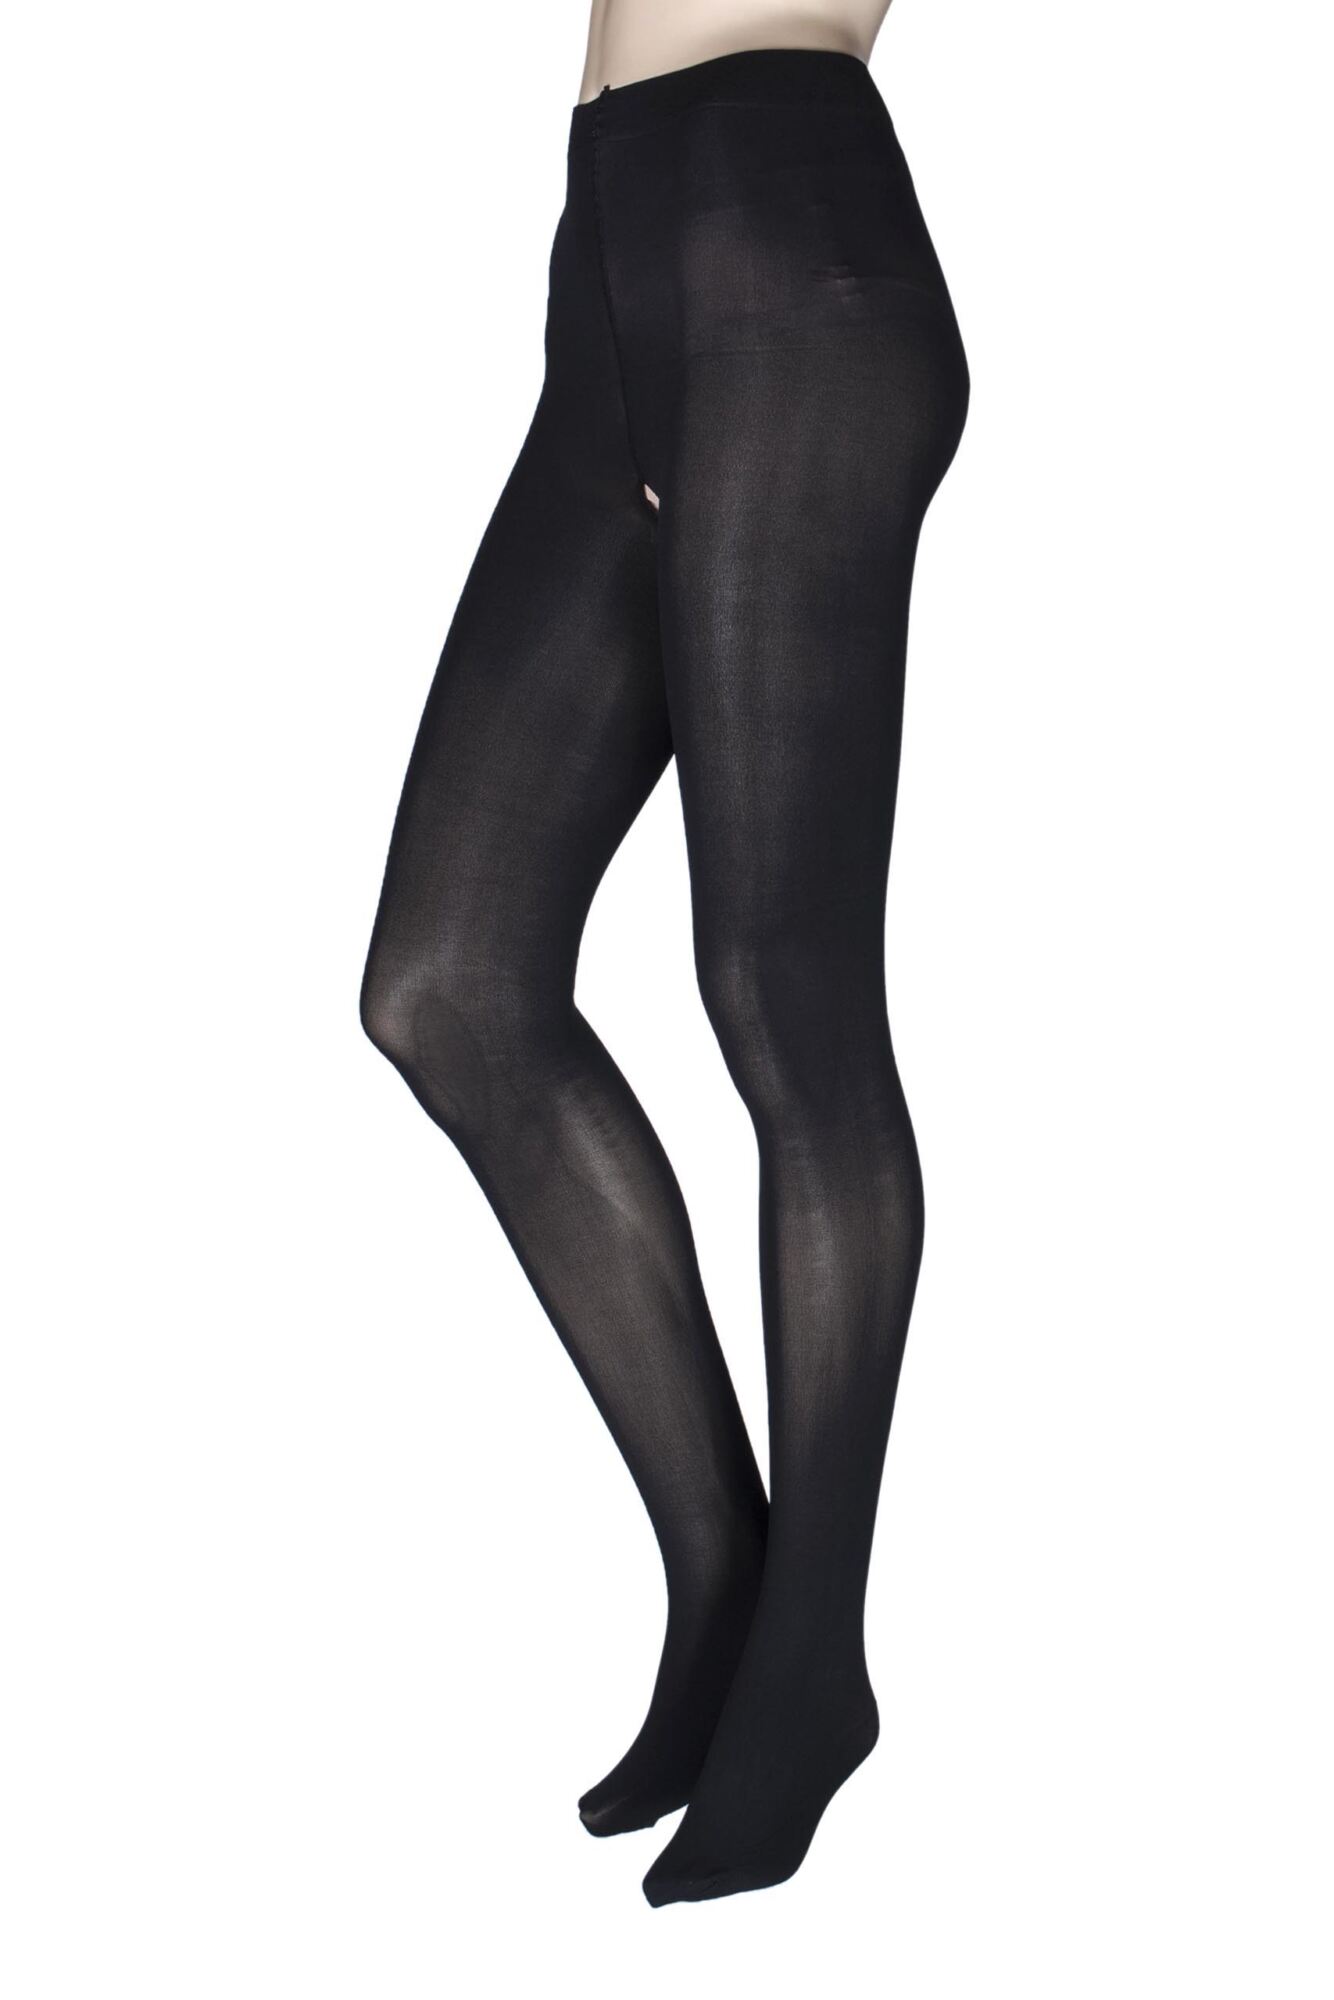 1 Pair 50 Denier Crotchless Tights - Up to XXXL Ladies - Miss Naughty